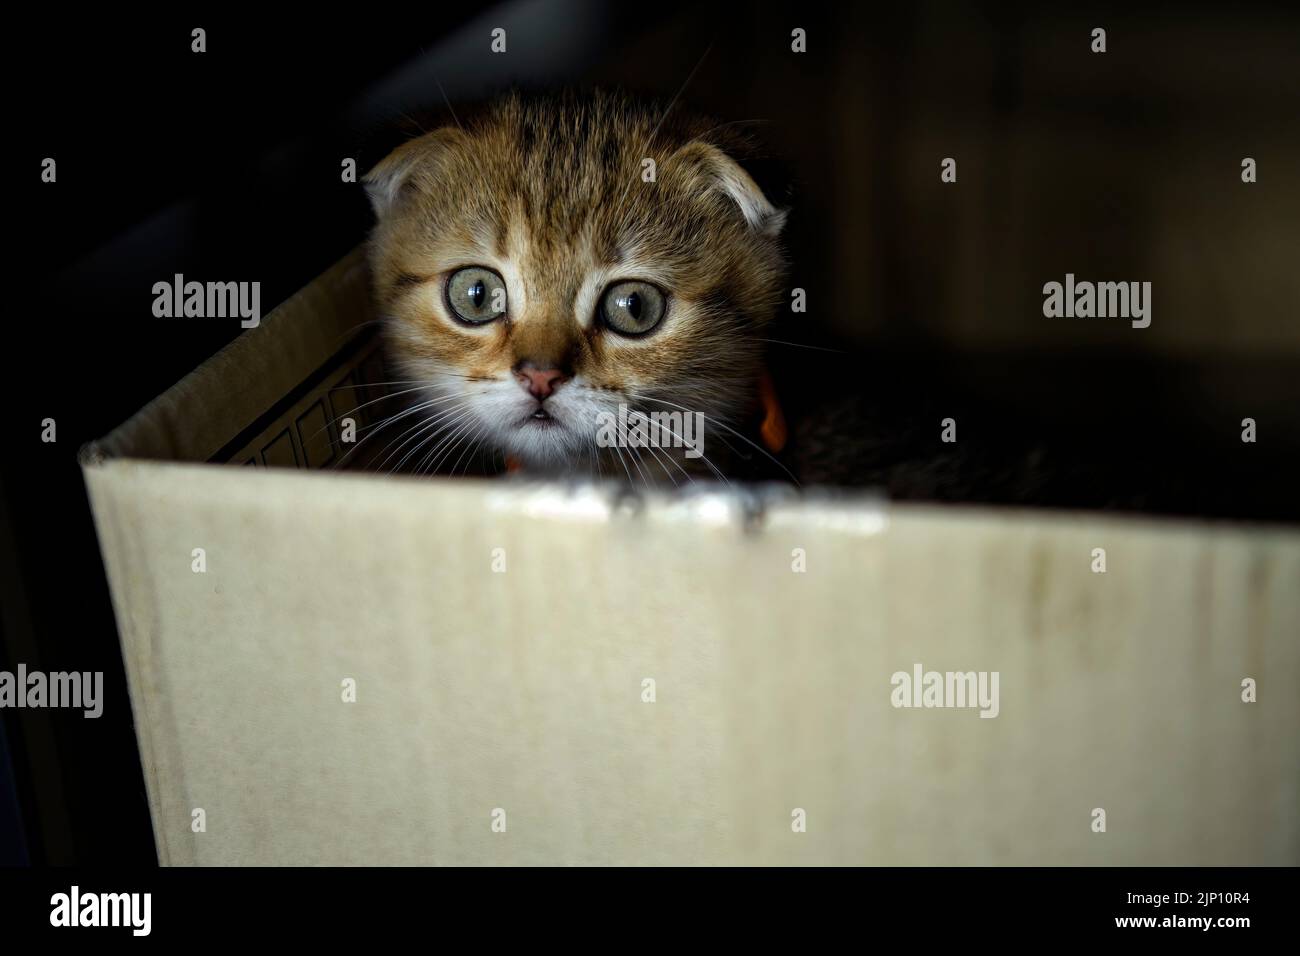 Striped Scottish Fold kitten playing naughty and secretly in the box In the dark and looking, the little cat hiding in a cardboard box looked pitiful. Stock Photo